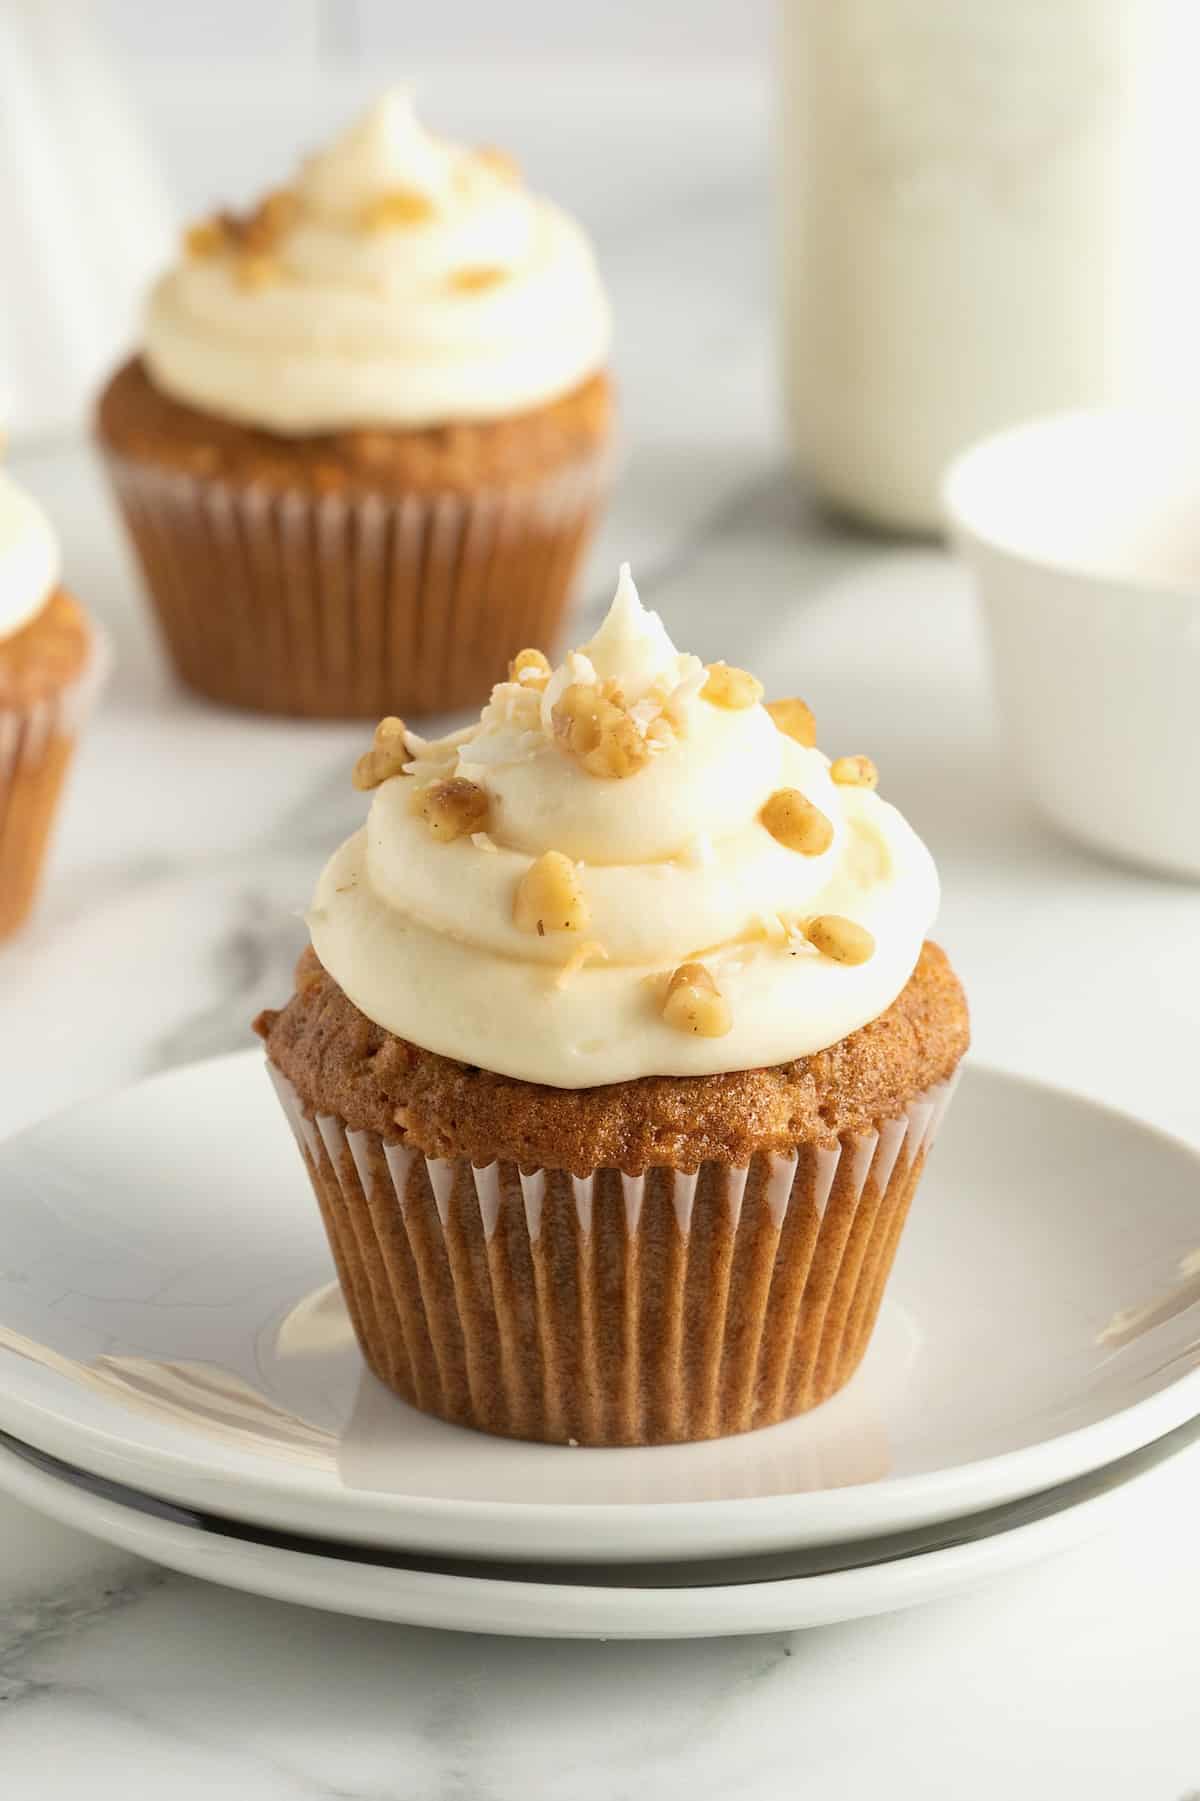 Carrot Cake Cupcakes by The BakerMama